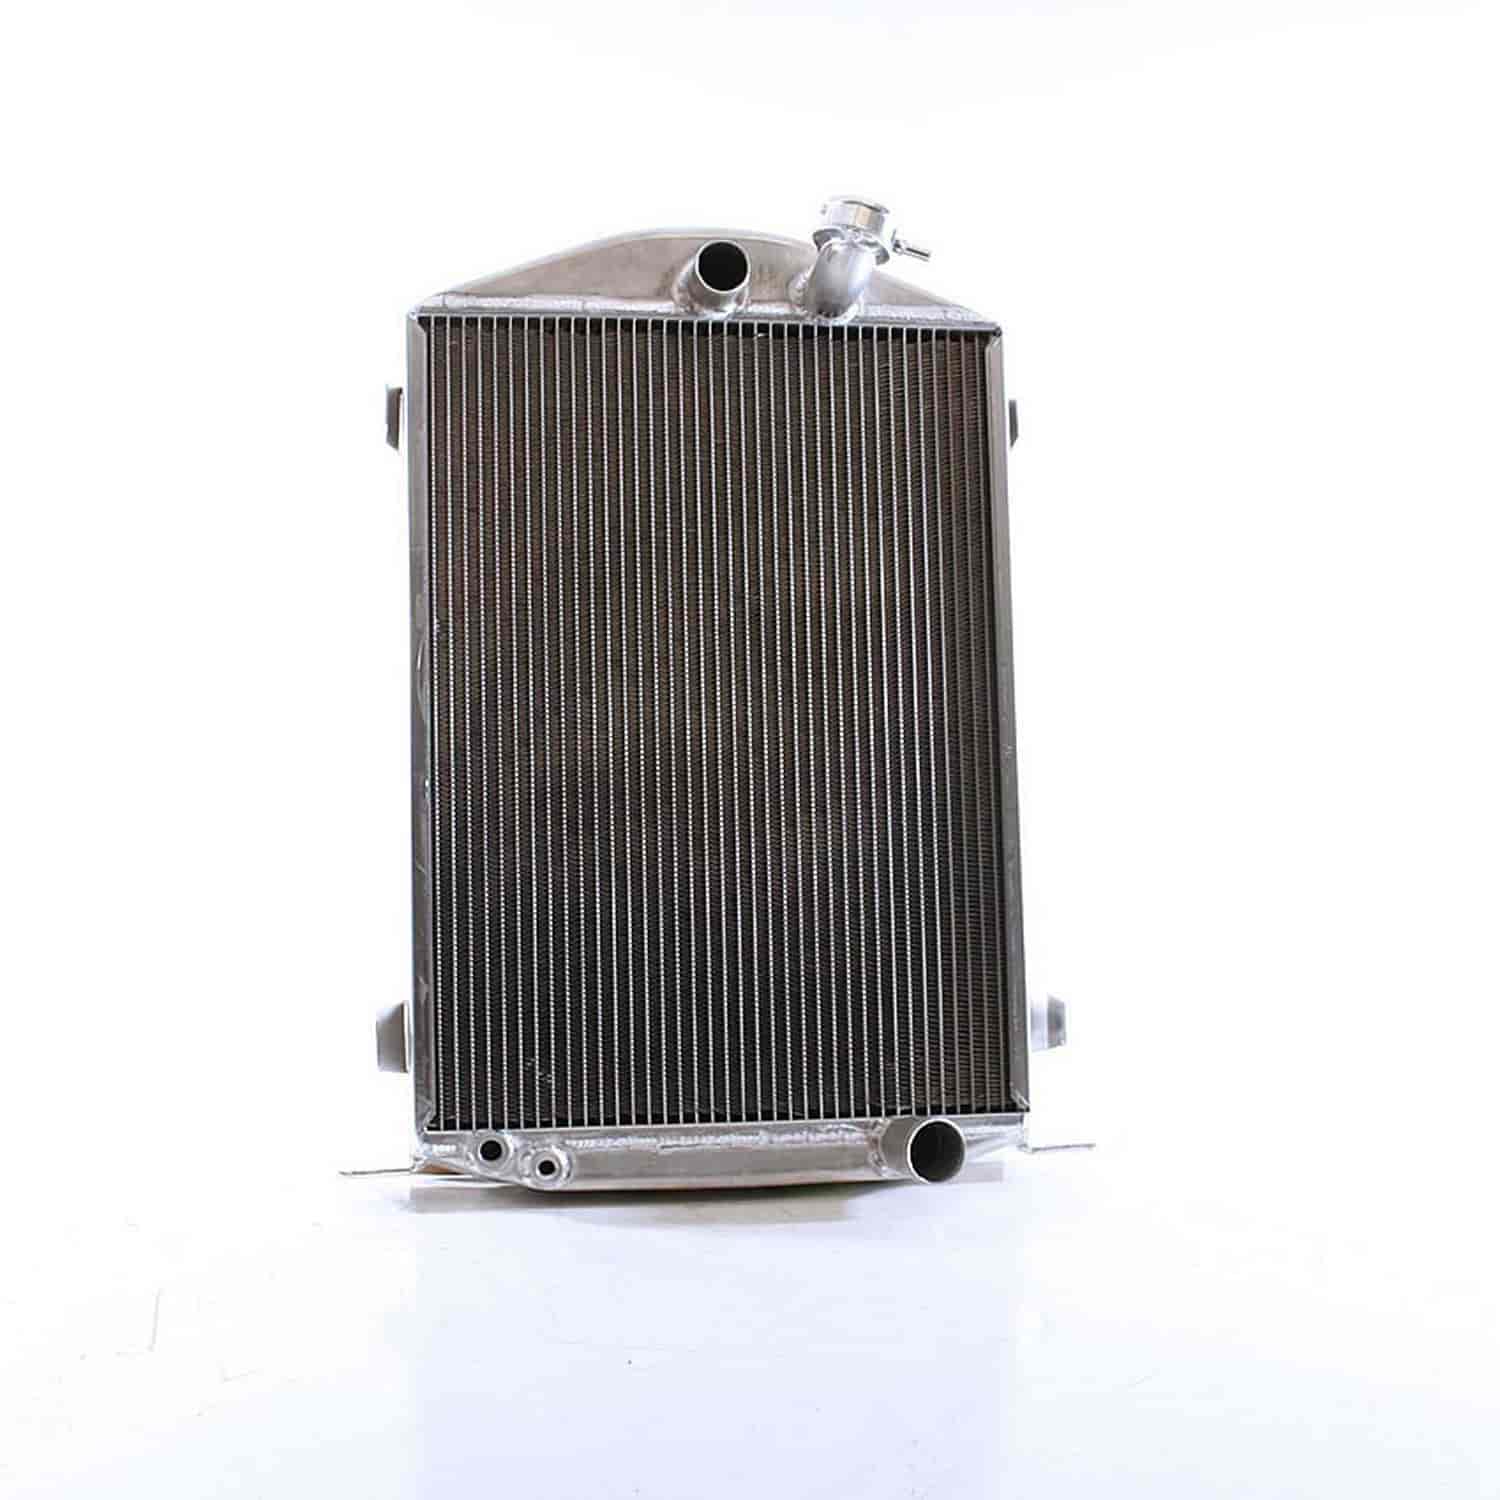 ExactFit Radiator for 1932 Model B with Early GM Engine